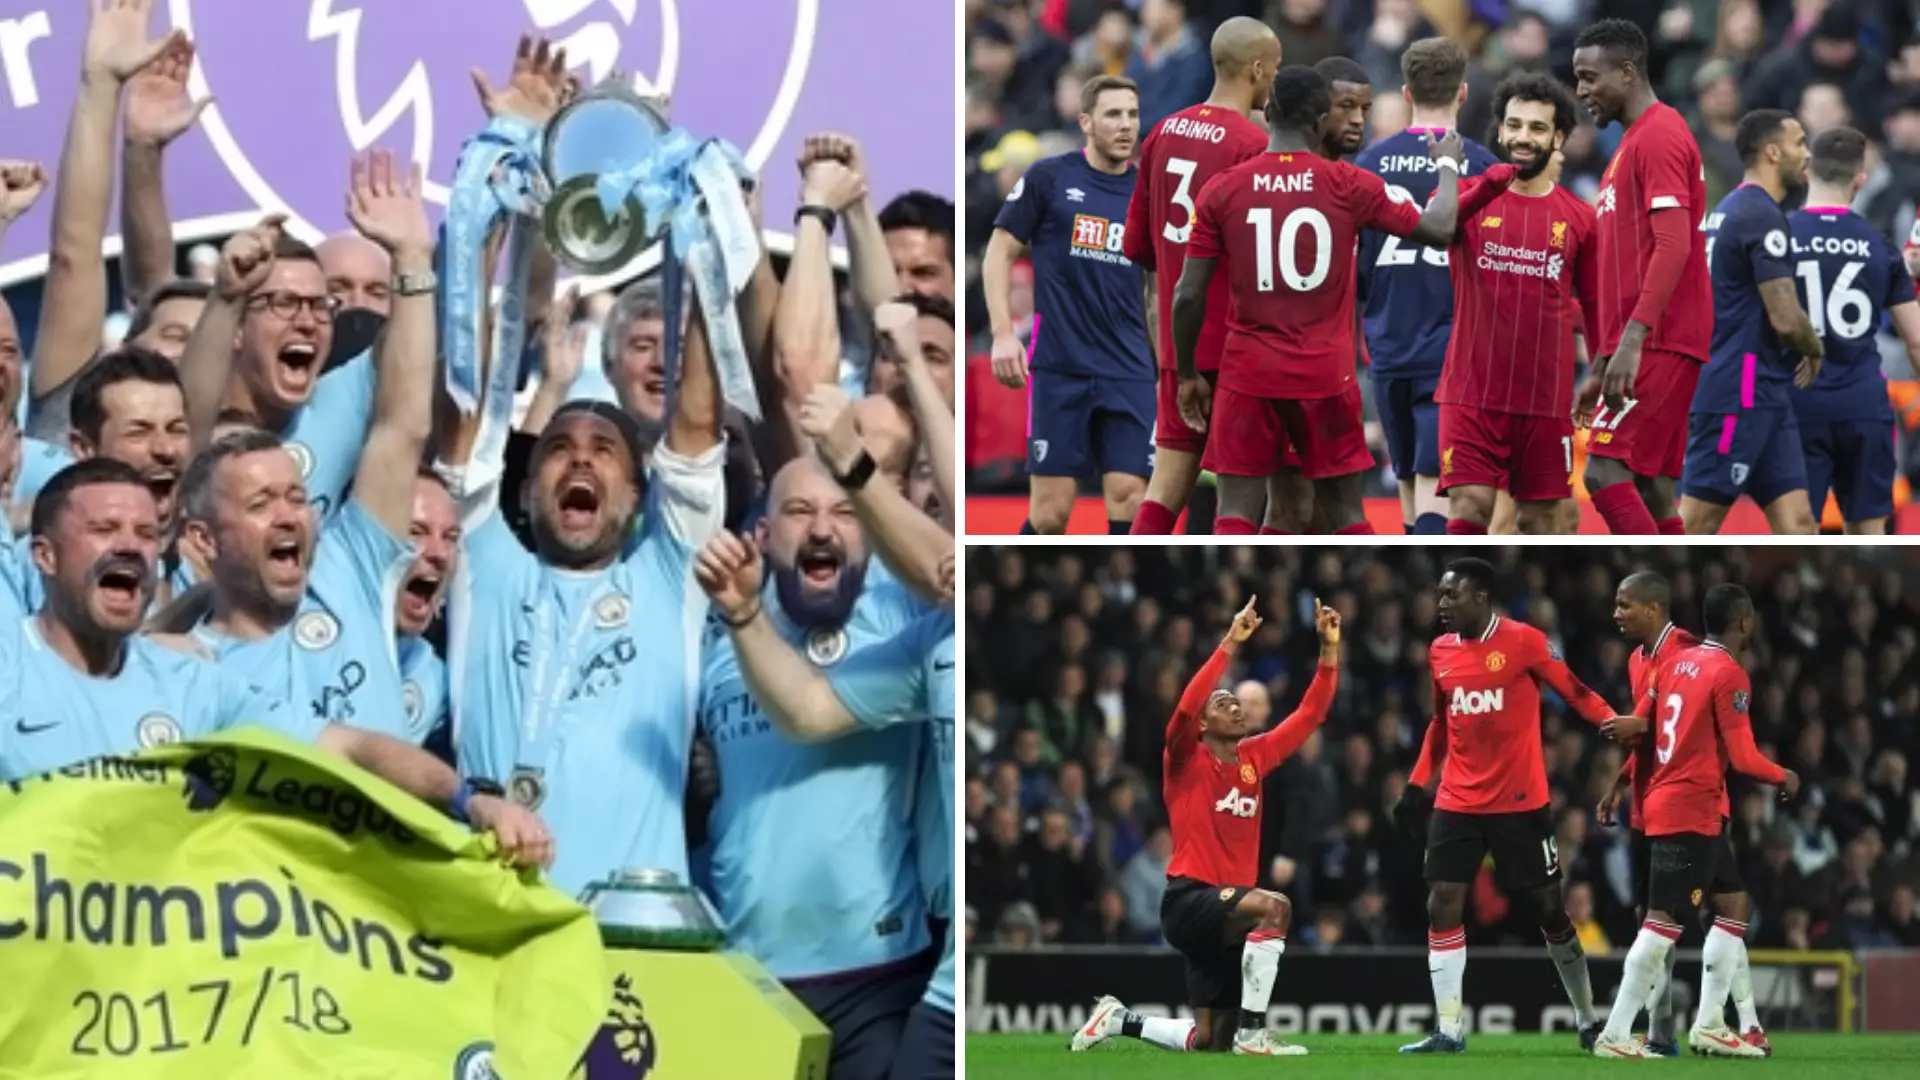 10 Most Entertaining Teams In Premier League History Have Been Ranked